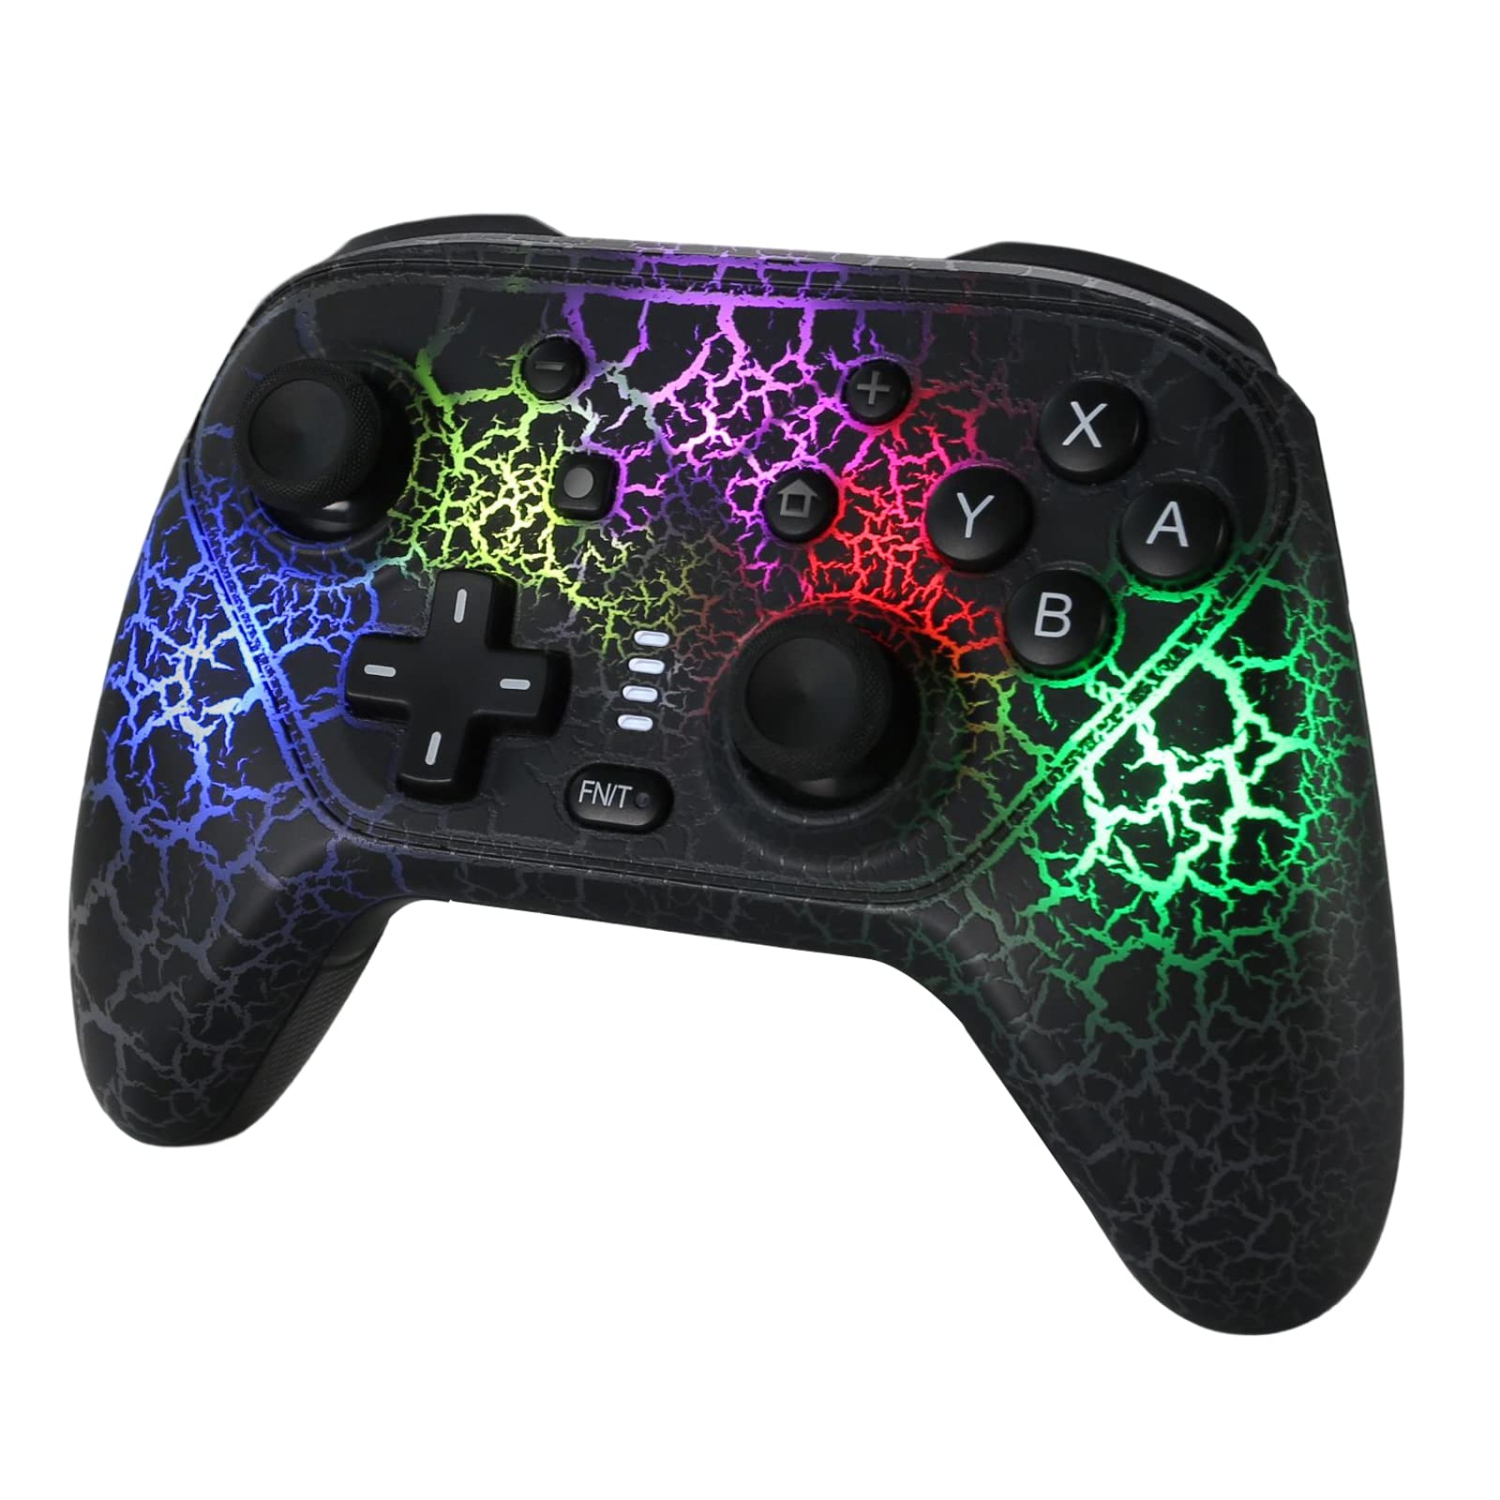 Switch Controllers, Wireless Switch Pro Controller with 9 Color Adjustable LED/Unique Crack/Turbo/Vibration/Motion Control/Wake-Up, Wireless Remote Gamepad for Nintendo Switch/Lite